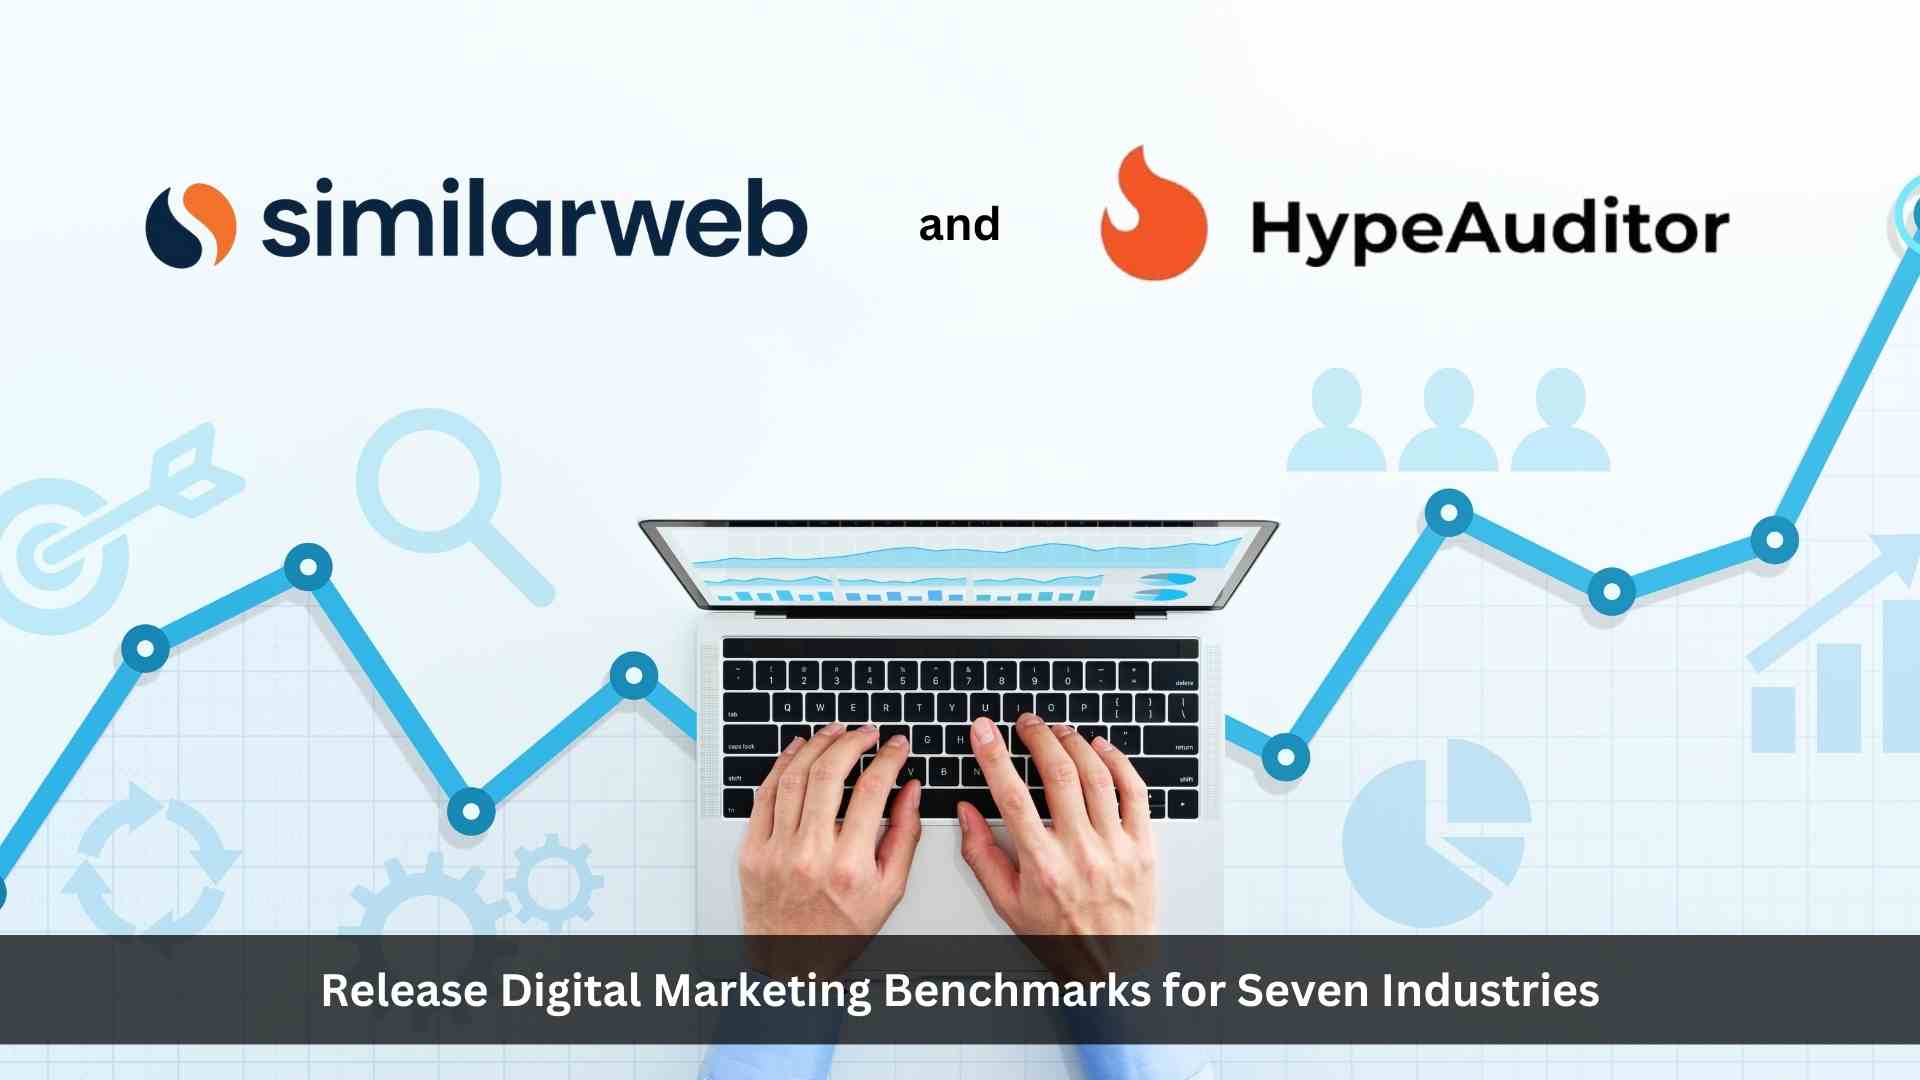 Similarweb and HypeAuditor Release Digital Marketing Benchmarks for Seven Industries